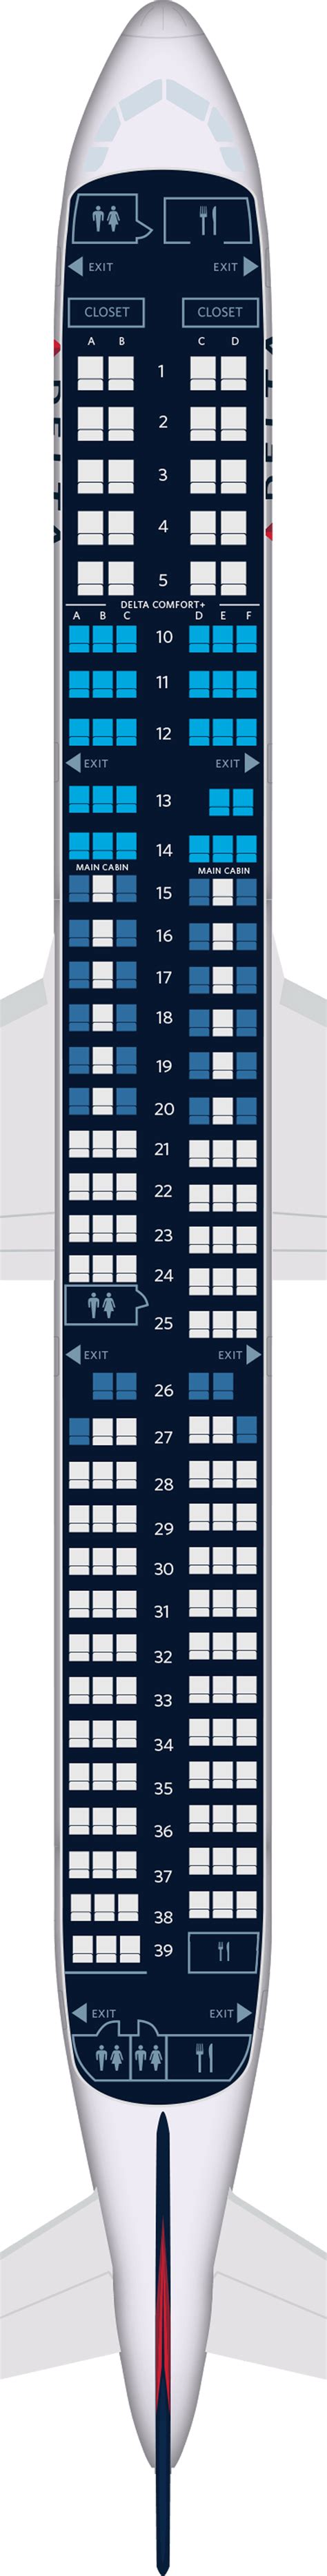 Visit delta.com to learn more. Our Airbus A320-200 aircraft offers a variety of signature products and experiences unlike anything else in the sky. Airbus A320-200 Seat Maps, Specs & Amenities | Delta Air Lines